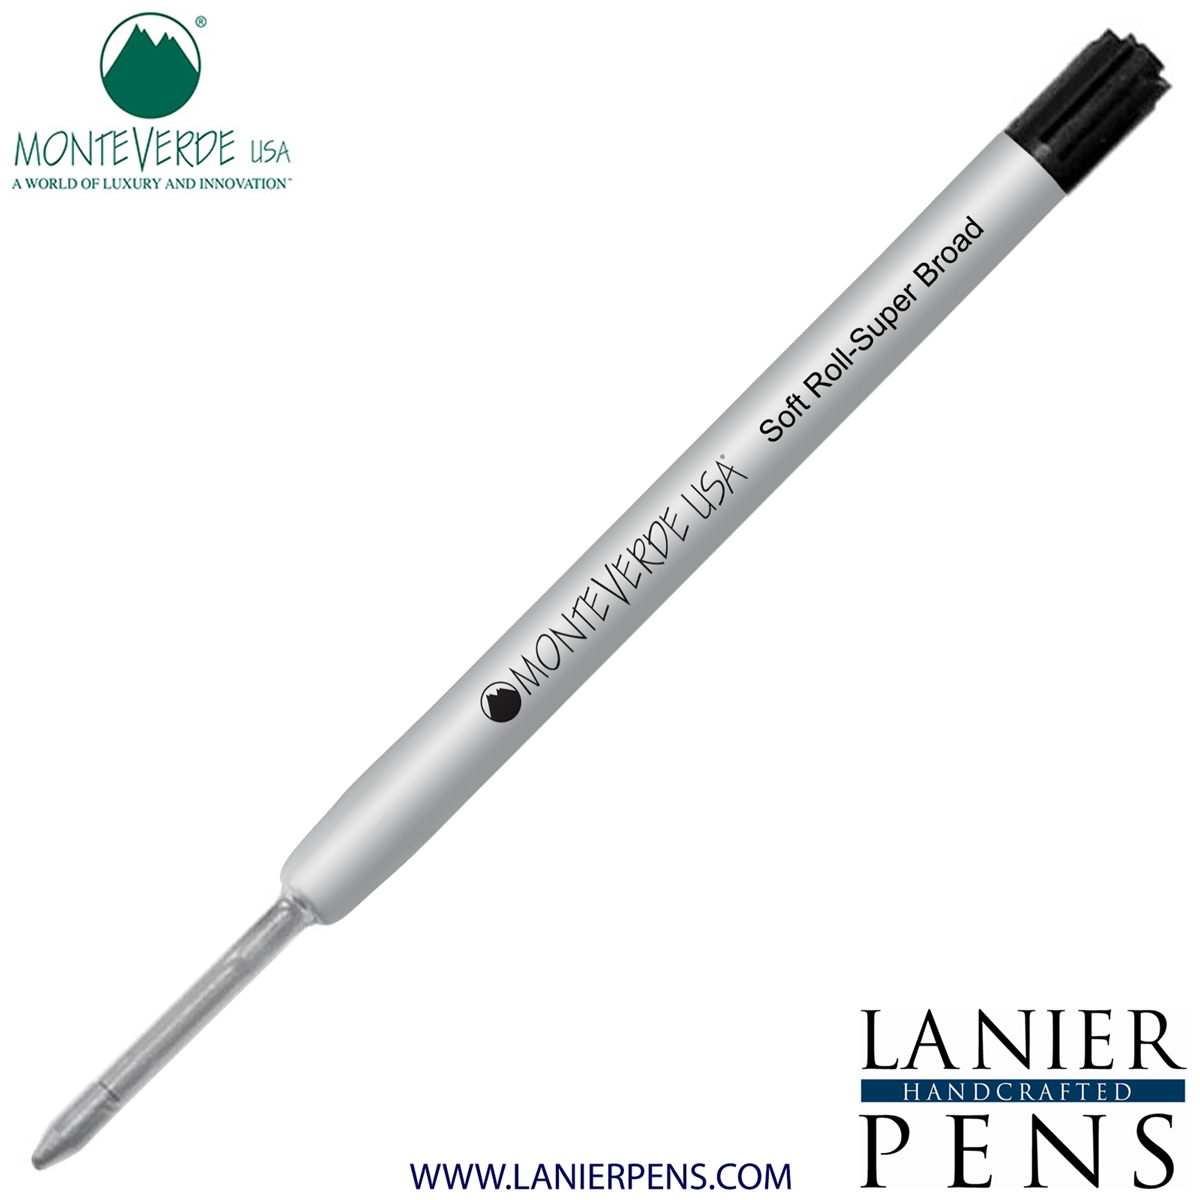 Monteverde Soft Roll Super Broad Ballpoint P15 Paste Ink Refill Compatible with most Parker Style Ballpoint Pens - Black (Super Broad Tip 1.4mm) - Lanier Pens